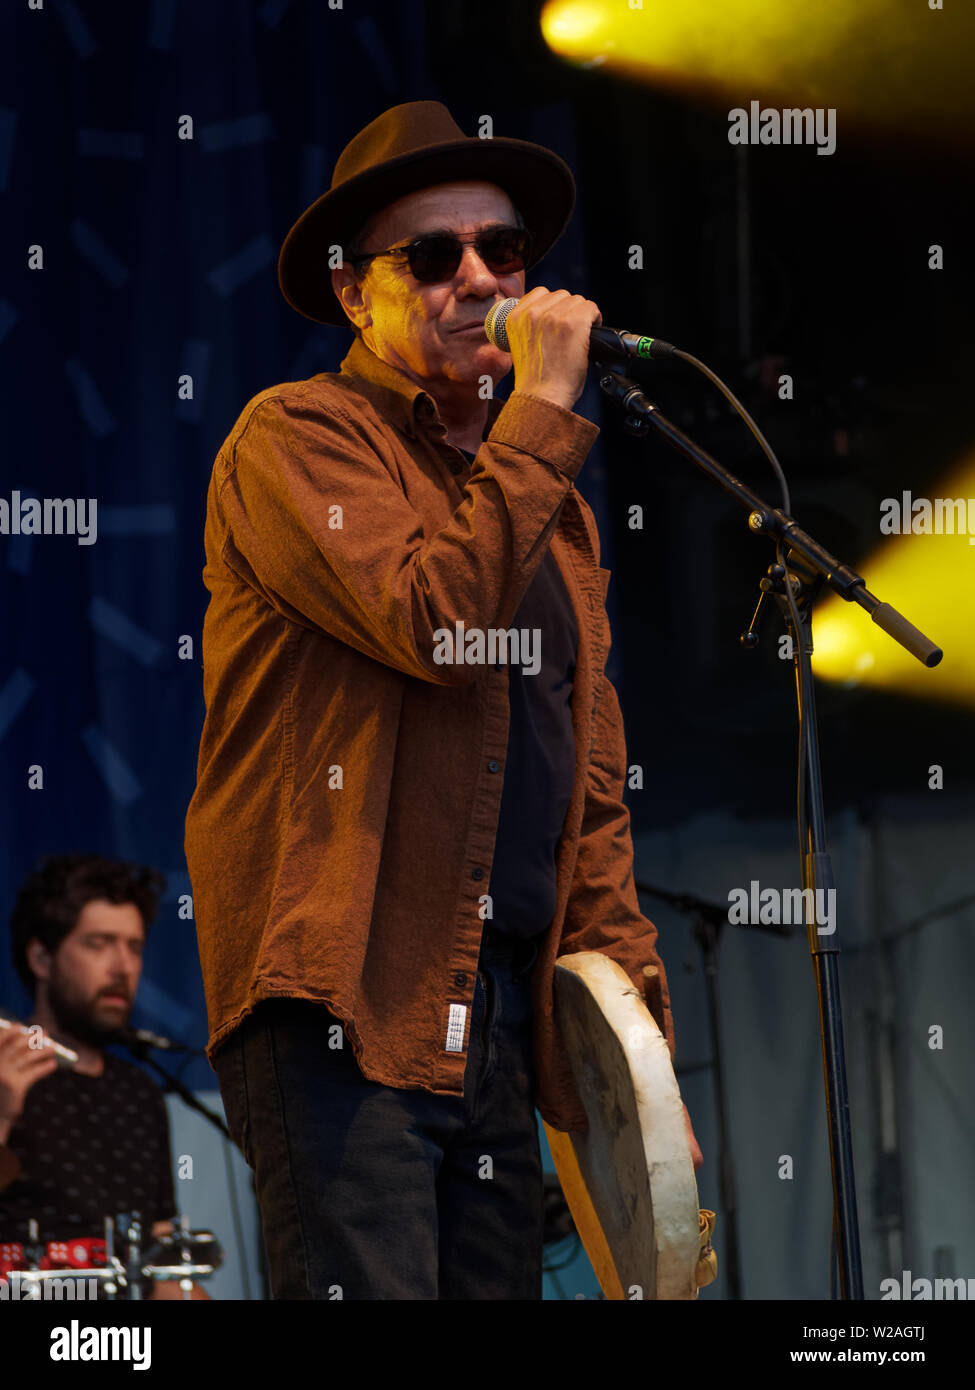 Montreal, Canada. 6/17/2019. Canadian Innu singer-songwriter Florent Volant perform on stage at the Francos French music festival in downtown Montreal Stock Photo